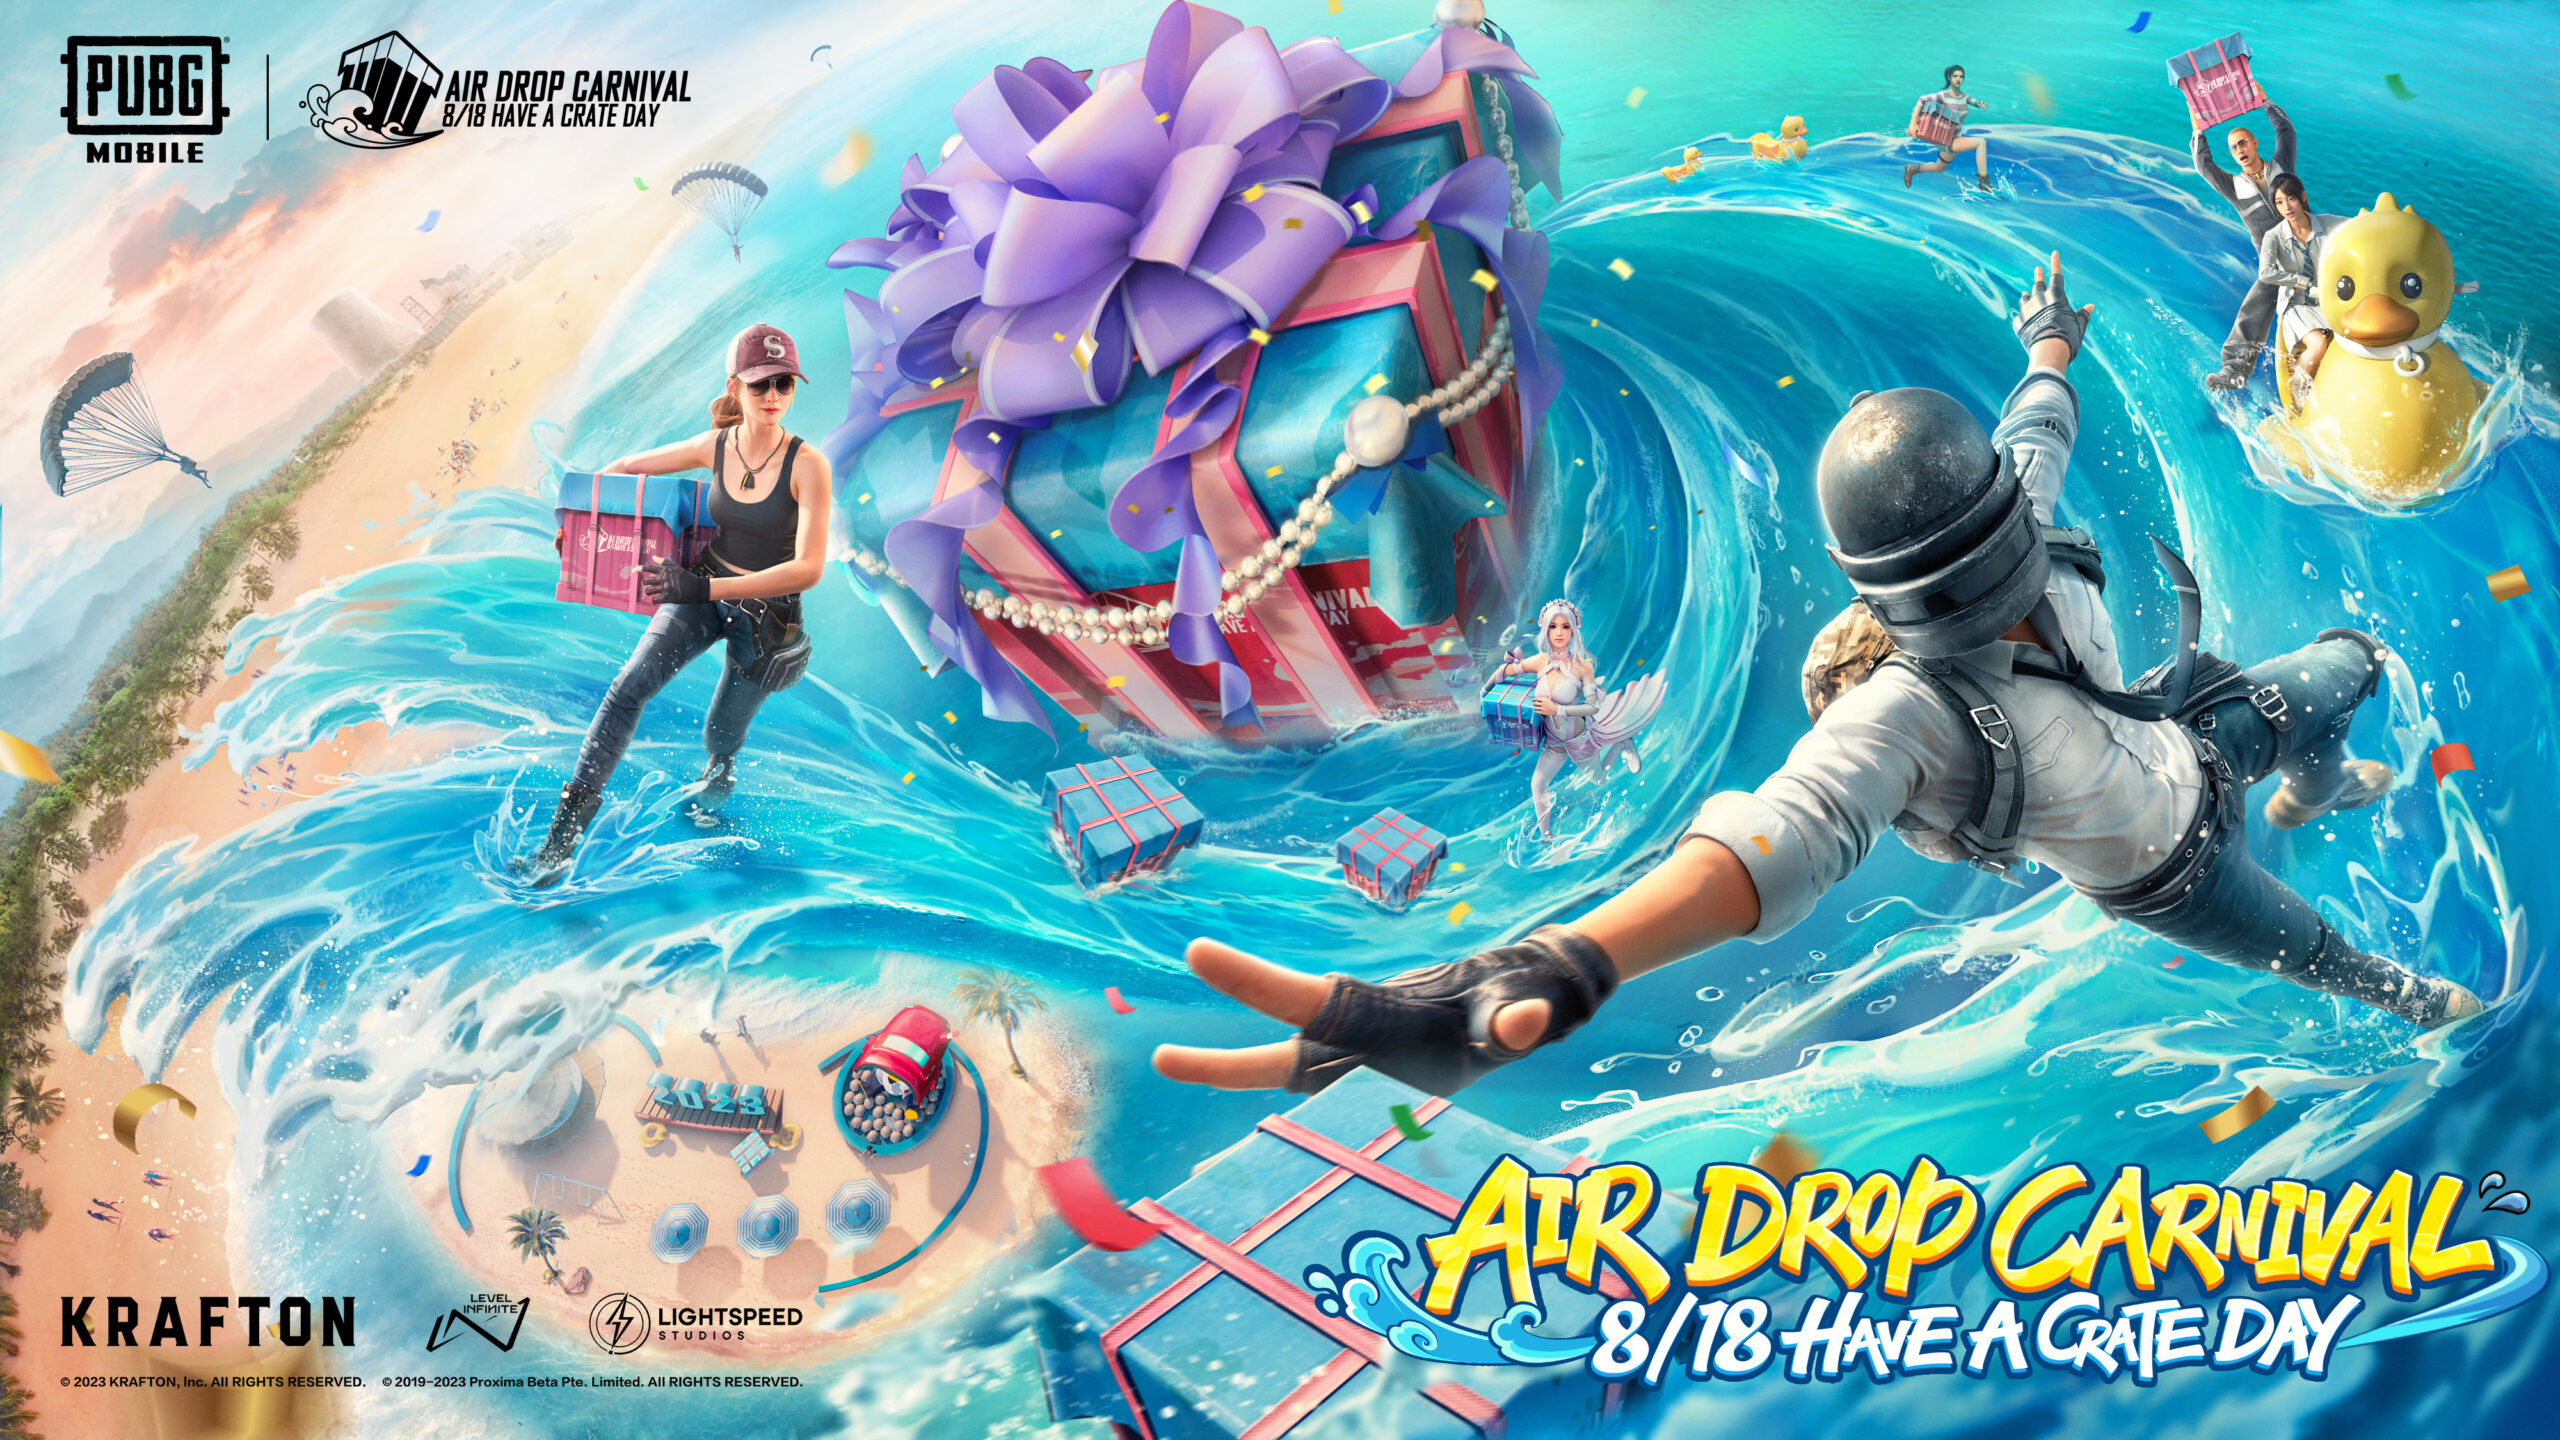 PUBG MOBILE Air Drop Carnival KV ENG scaled